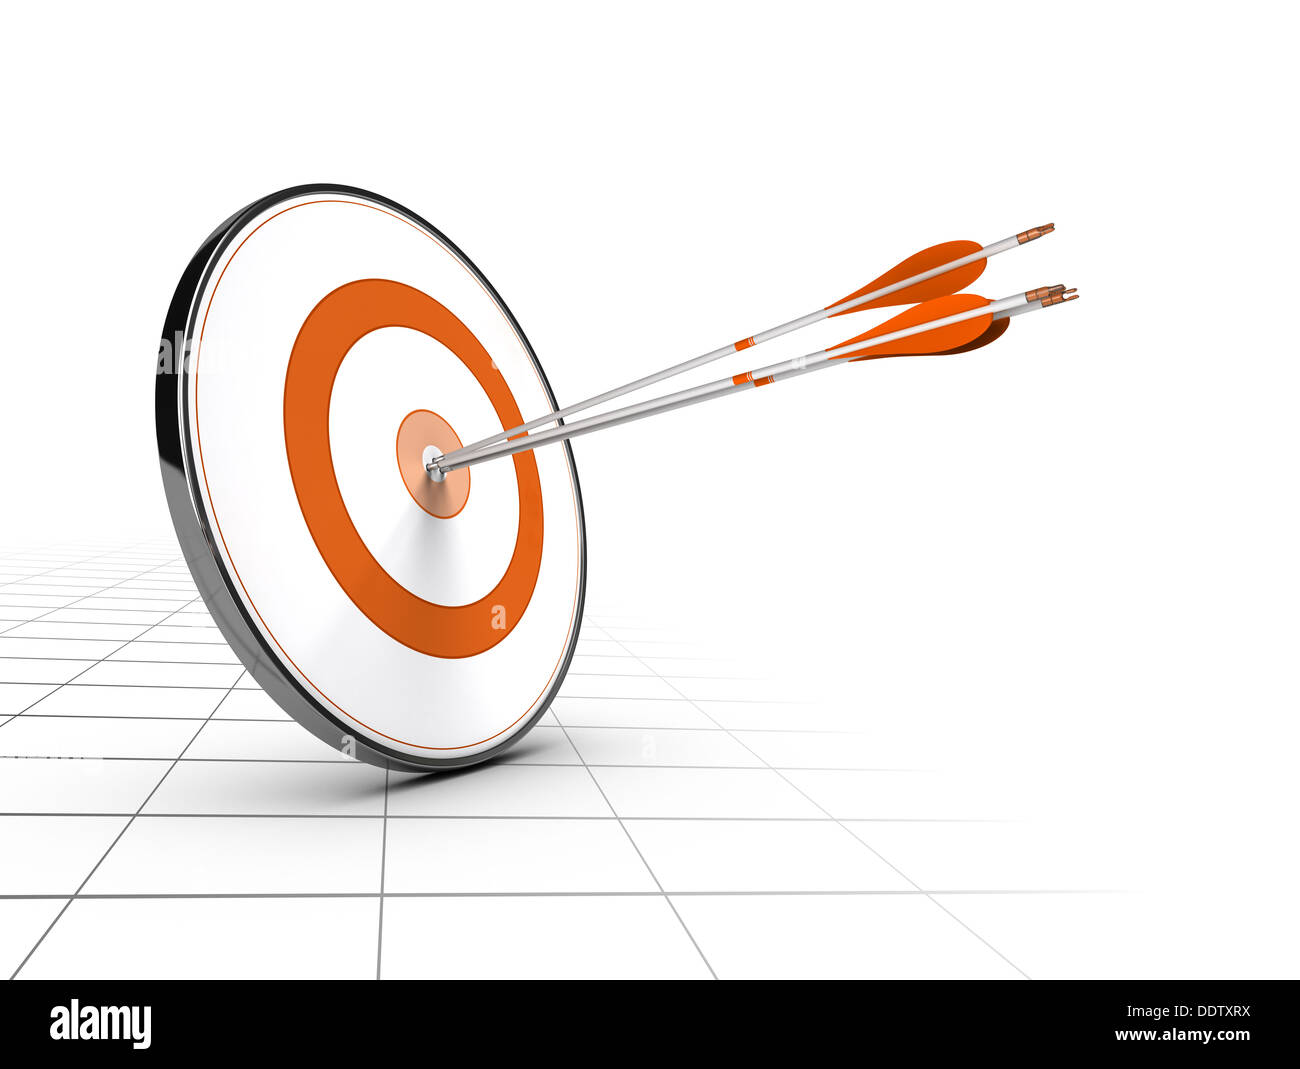 Advice or business competition concept. One target and three arrows achieving their objectives. Stock Photo